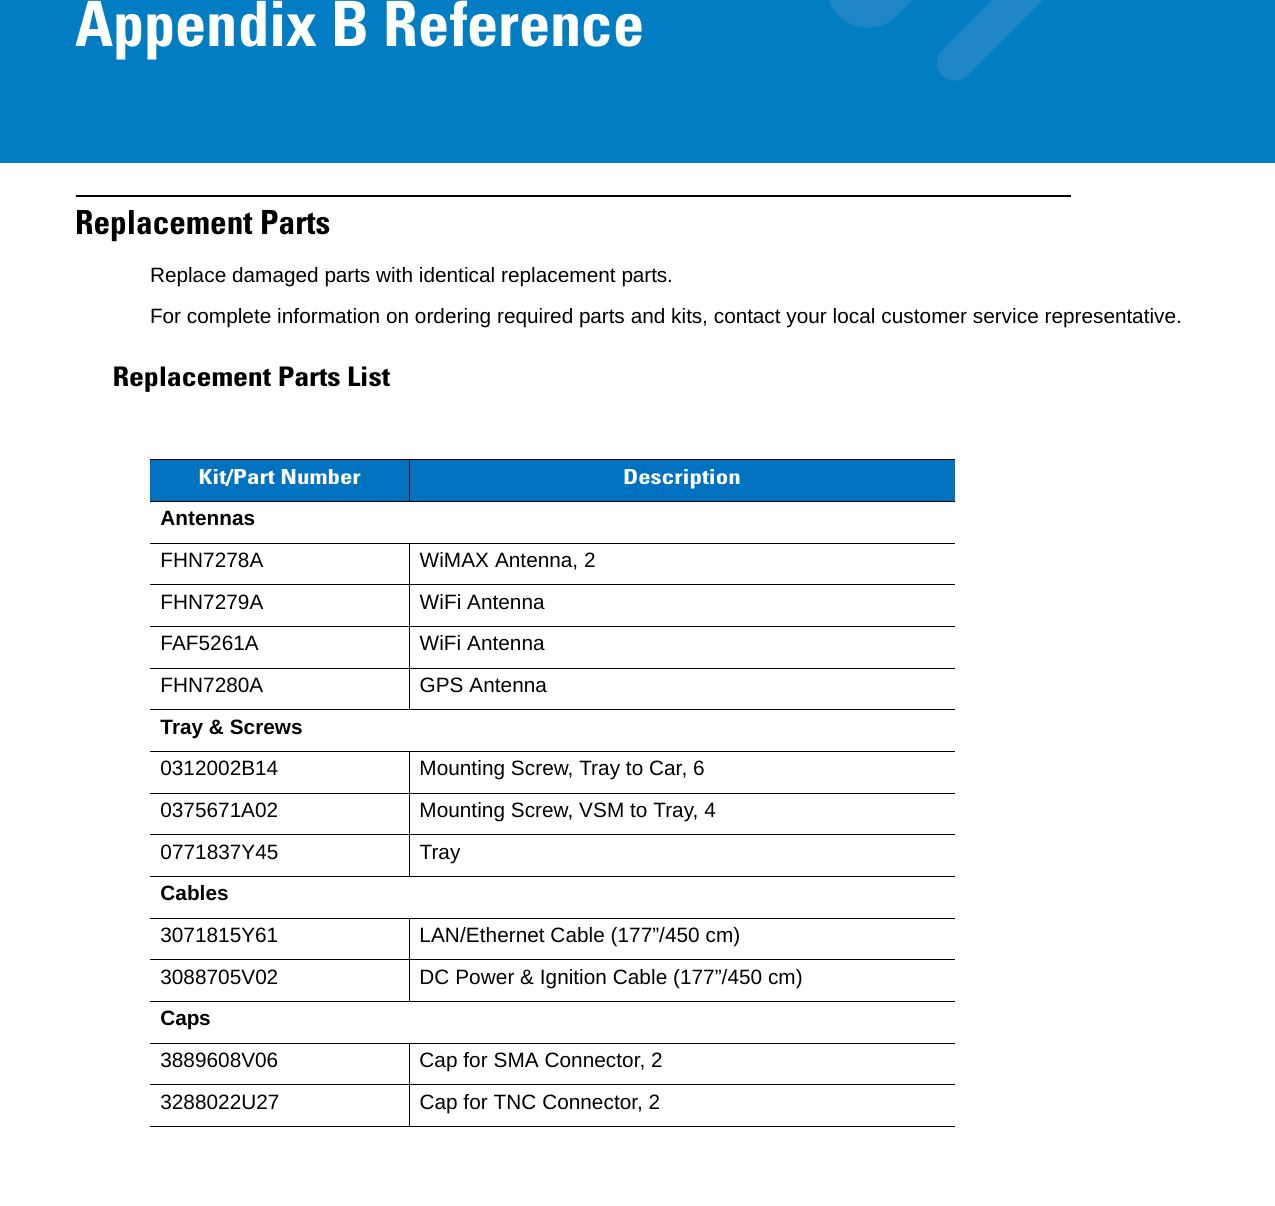 Appendix B ReferenceReplacement PartsReplace damaged parts with identical replacement parts.For complete information on ordering required parts and kits, contact your local customer service representative.Replacement Parts ListKit/Part Number DescriptionAntennasFHN7278A WiMAX Antenna, 2FHN7279A WiFi AntennaFAF5261A WiFi AntennaFHN7280A GPS AntennaTray &amp; Screws0312002B14 Mounting Screw, Tray to Car, 60375671A02 Mounting Screw, VSM to Tray, 40771837Y45 TrayCables3071815Y61 LAN/Ethernet Cable (177”/450 cm)3088705V02 DC Power &amp; Ignition Cable (177”/450 cm)Caps3889608V06 Cap for SMA Connector, 23288022U27 Cap for TNC Connector, 2